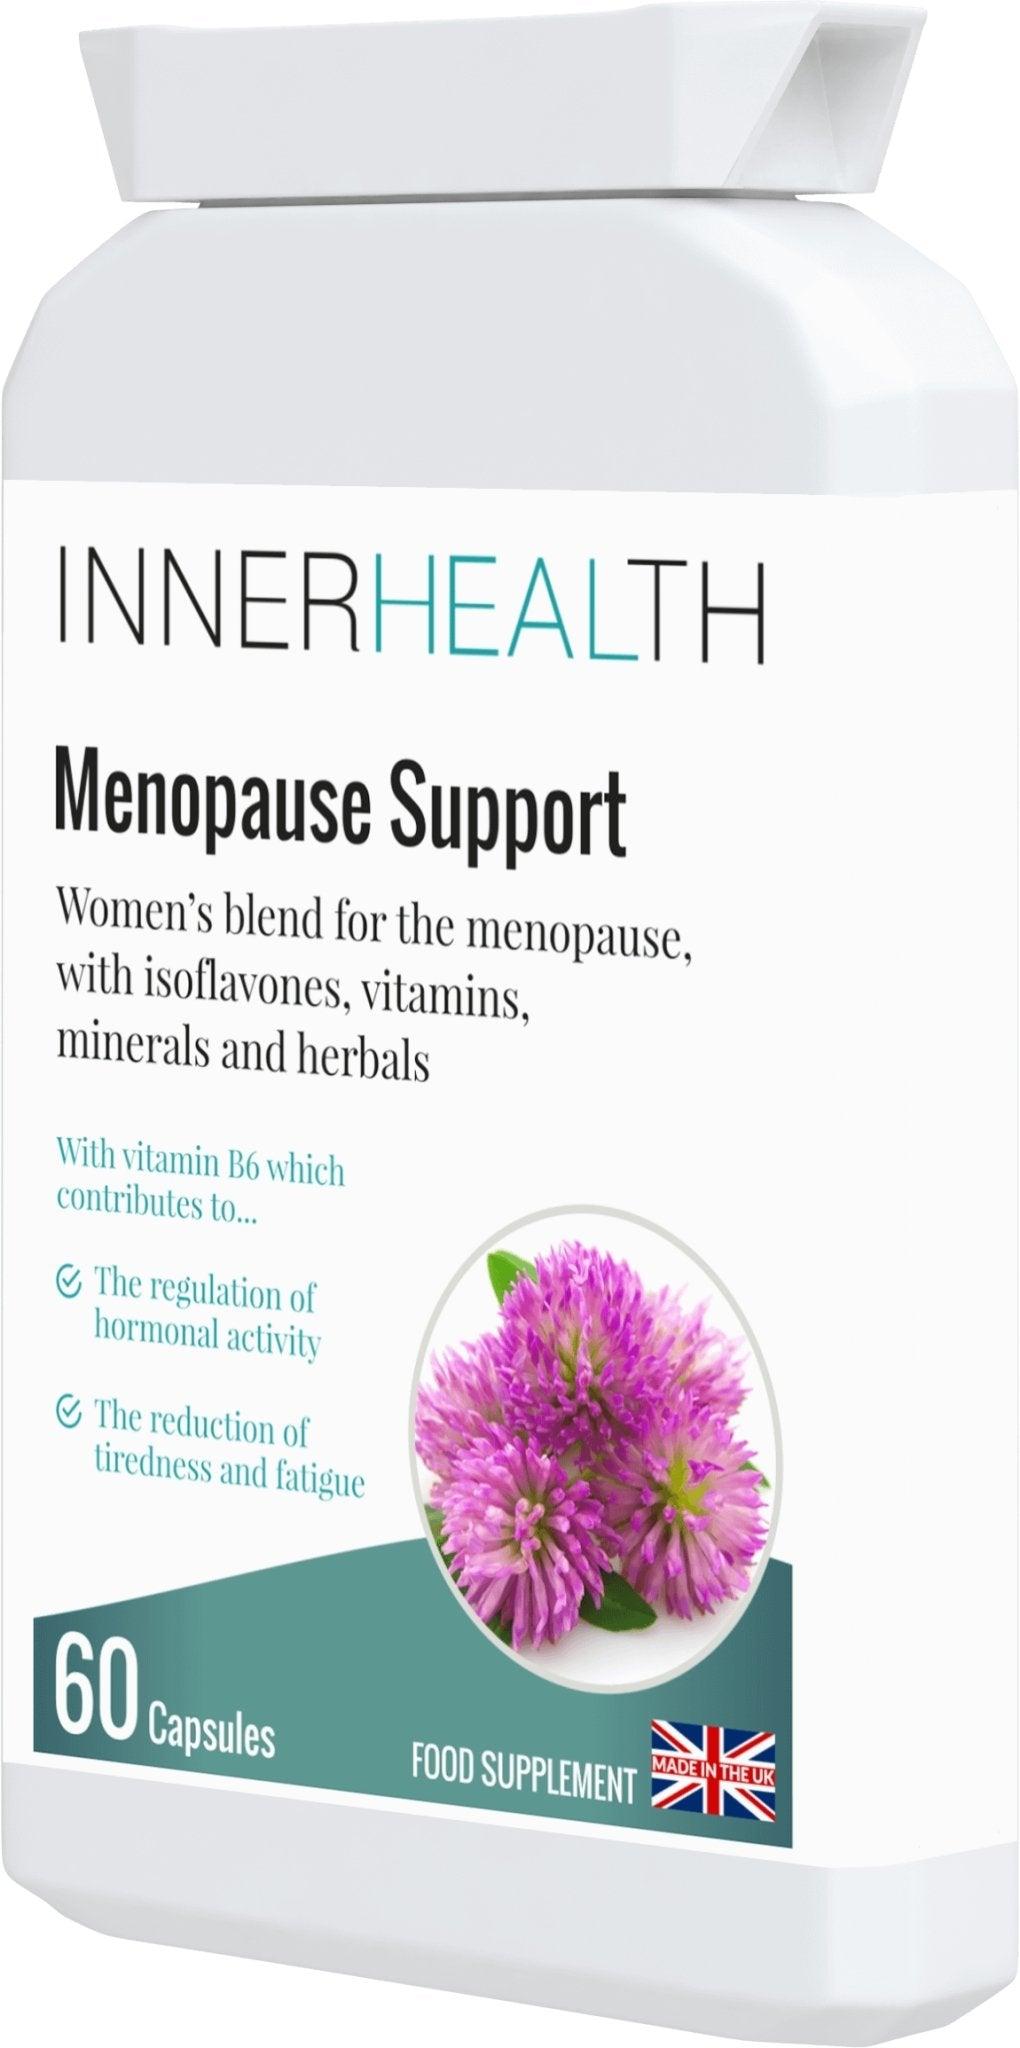 Menopause support - 60 Capsules - Inner Health Clinic